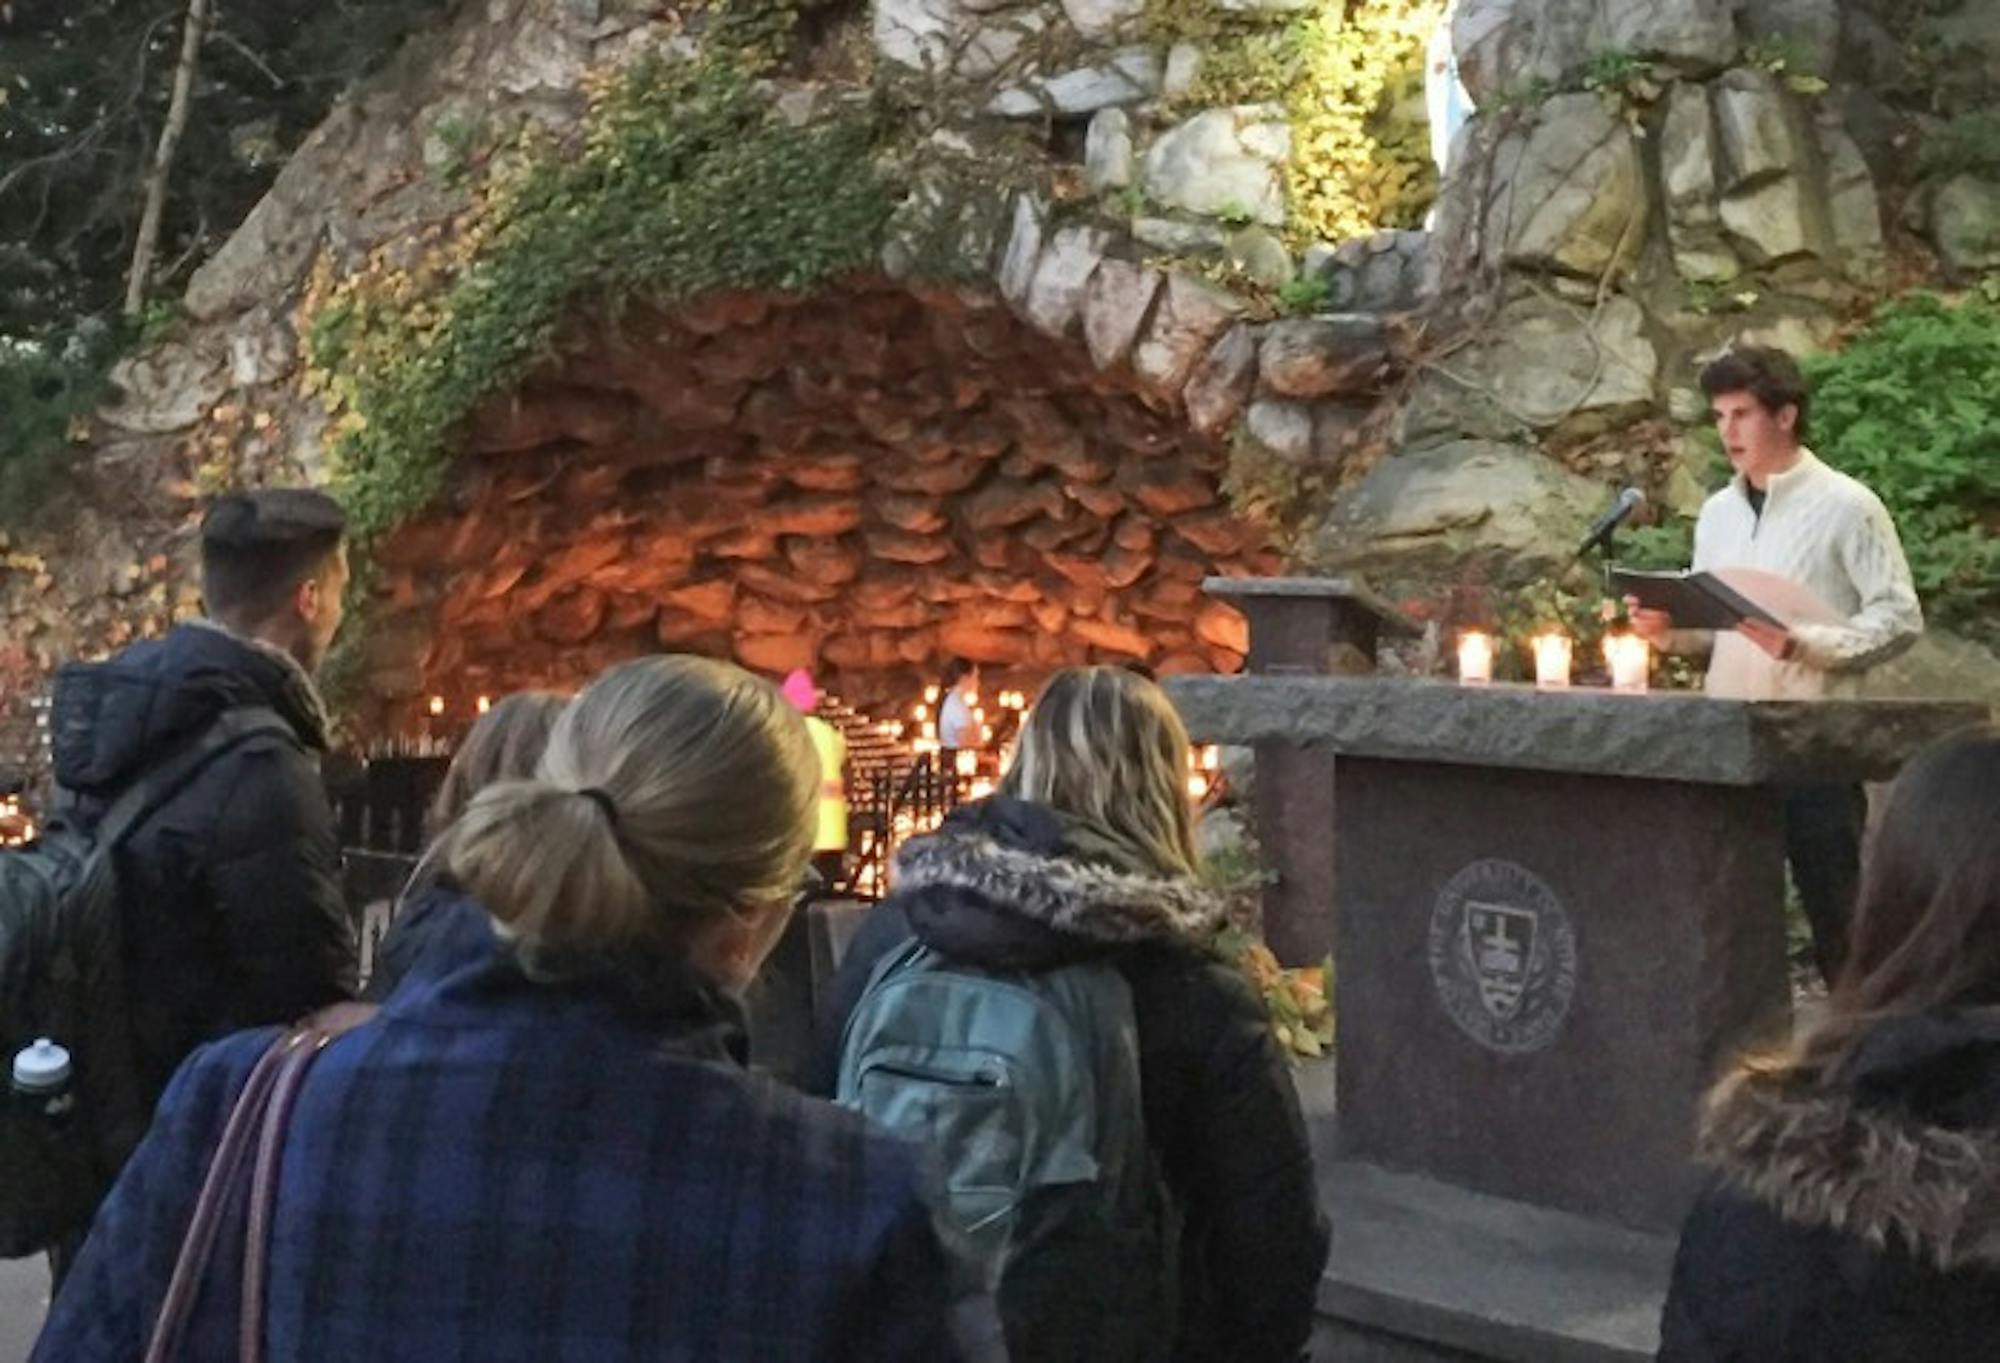 Students congregated at the Grotto on Nov. 22 for a prayer service to end sexual violence. The service was held in response to an email students received on Nov. 18 reporting a sexual assault.